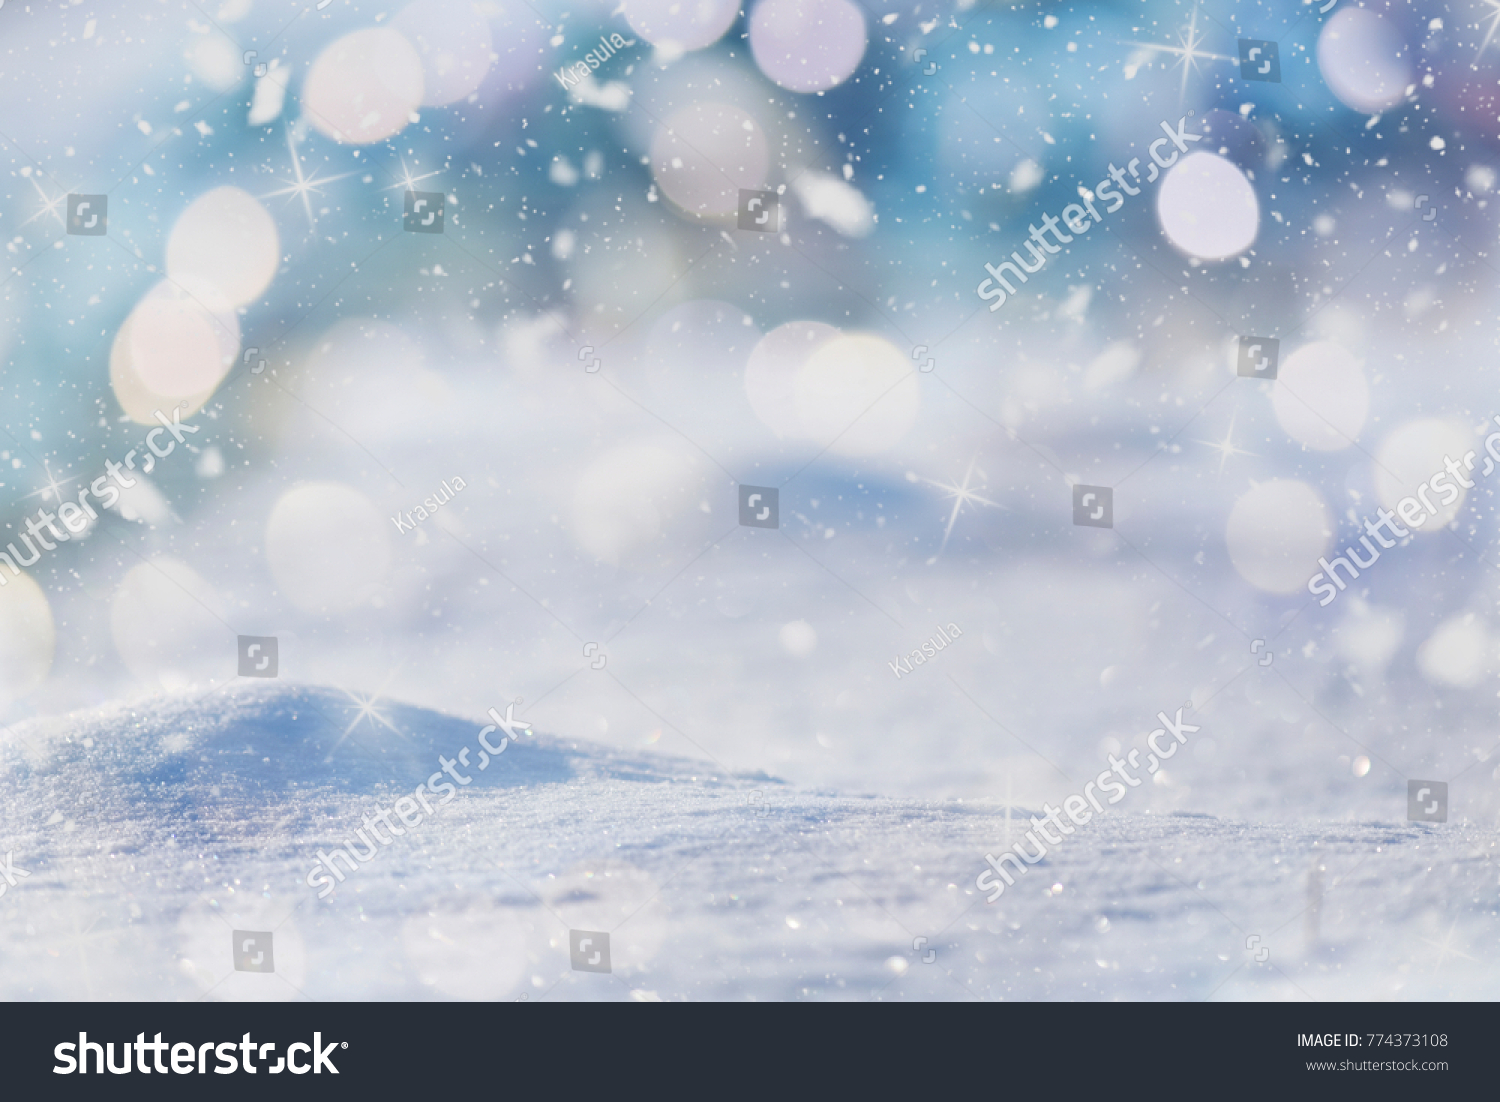 Winter abstract background, Colour glitters on snow. Christmas abrstact with shiny glitters #774373108